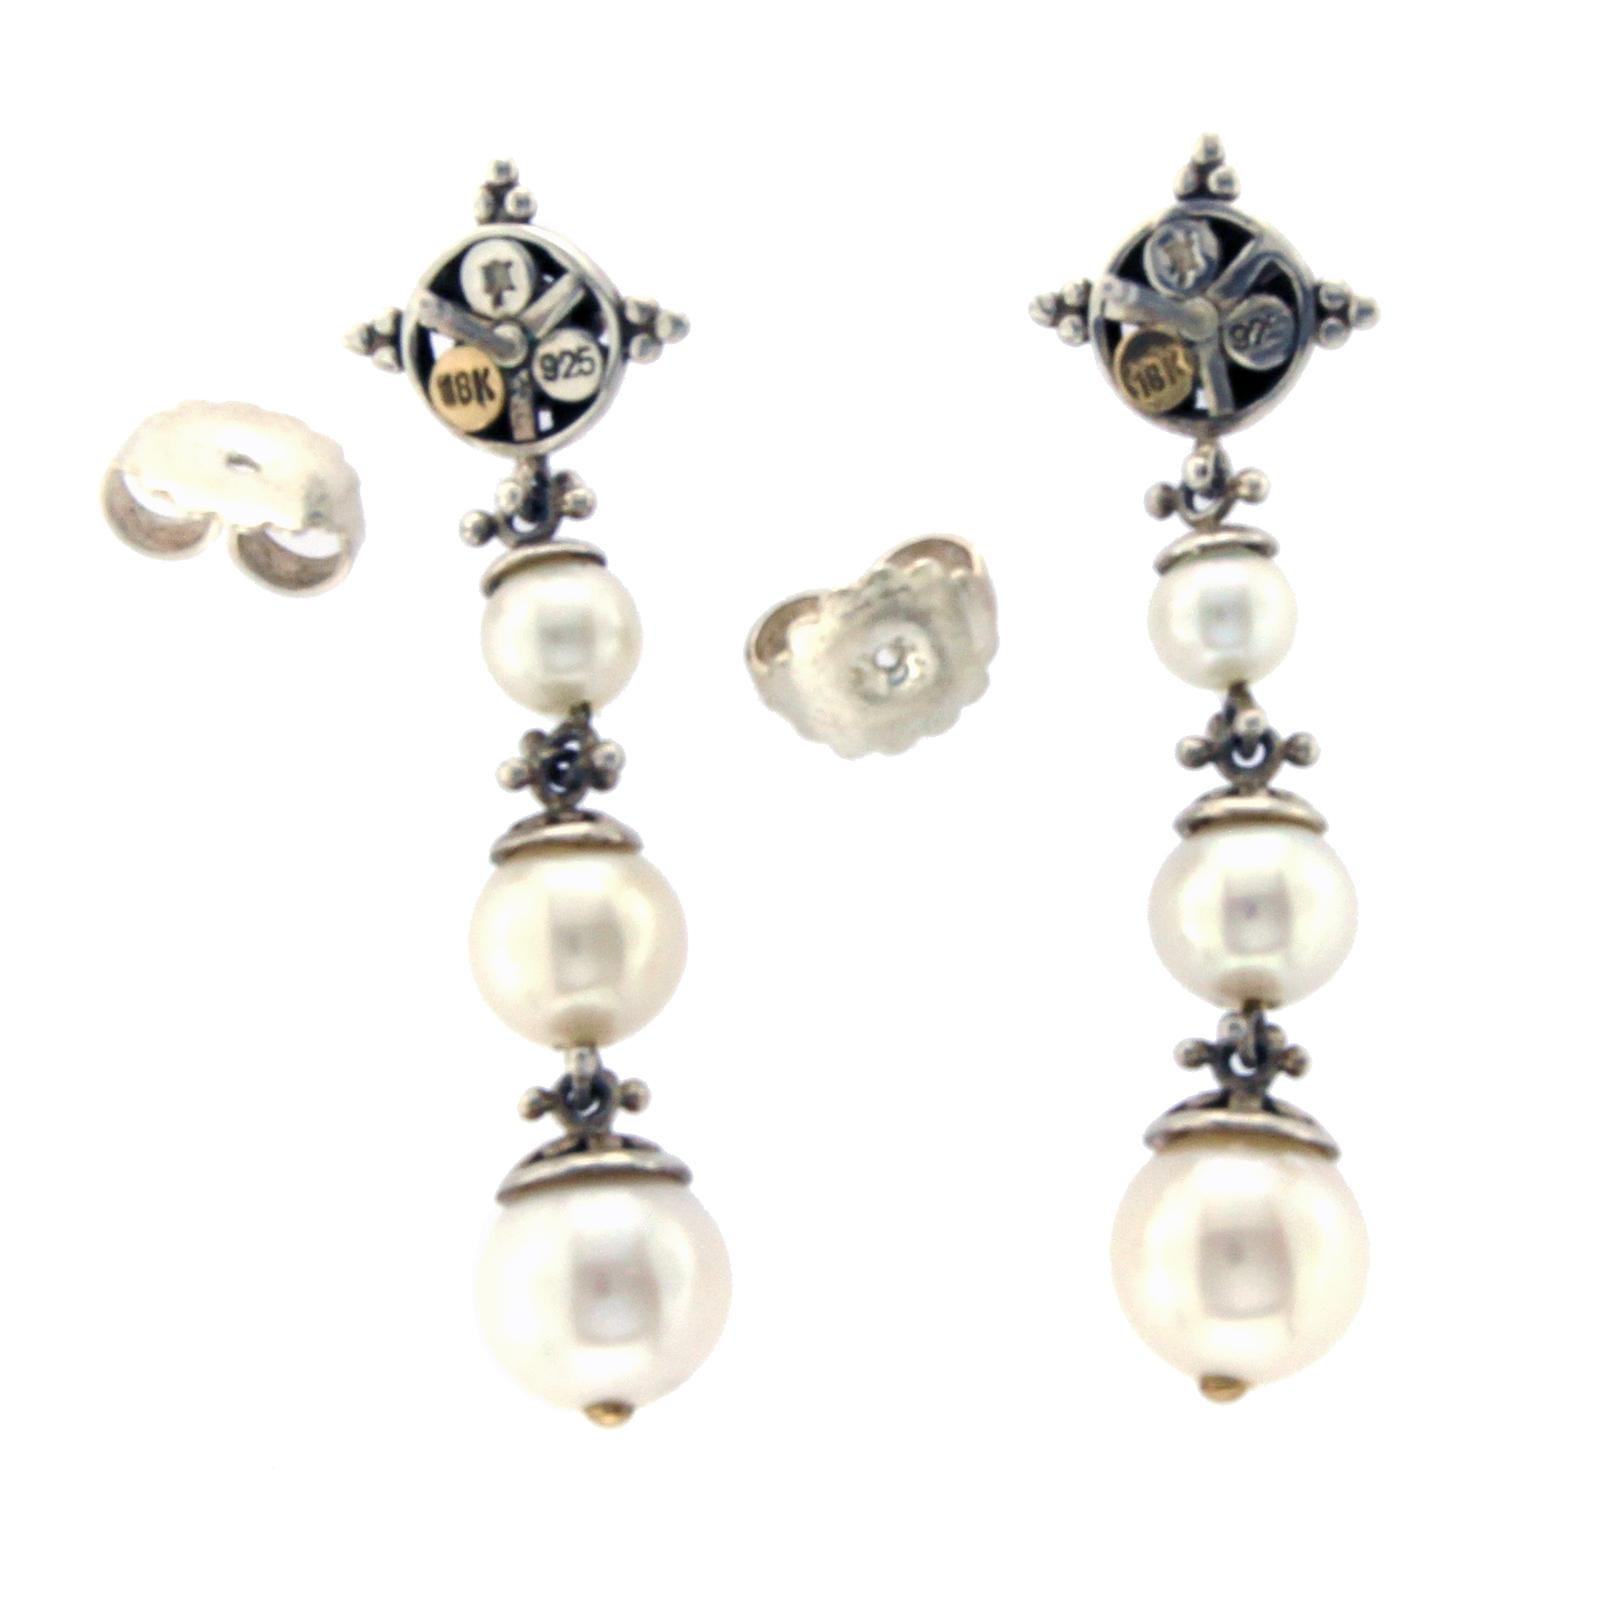 Type: Earrings
Height: 48 mm (1.90 Inches)
Width: 10 mm
Metal: Silver and Gold
Metal Purity: 925 18K
Hallmarks: JH 925 & 18K
Total Weight: 10.2 Grams
Stone Type: Pearl
Condition: Pre Owned
Stock Number: U214